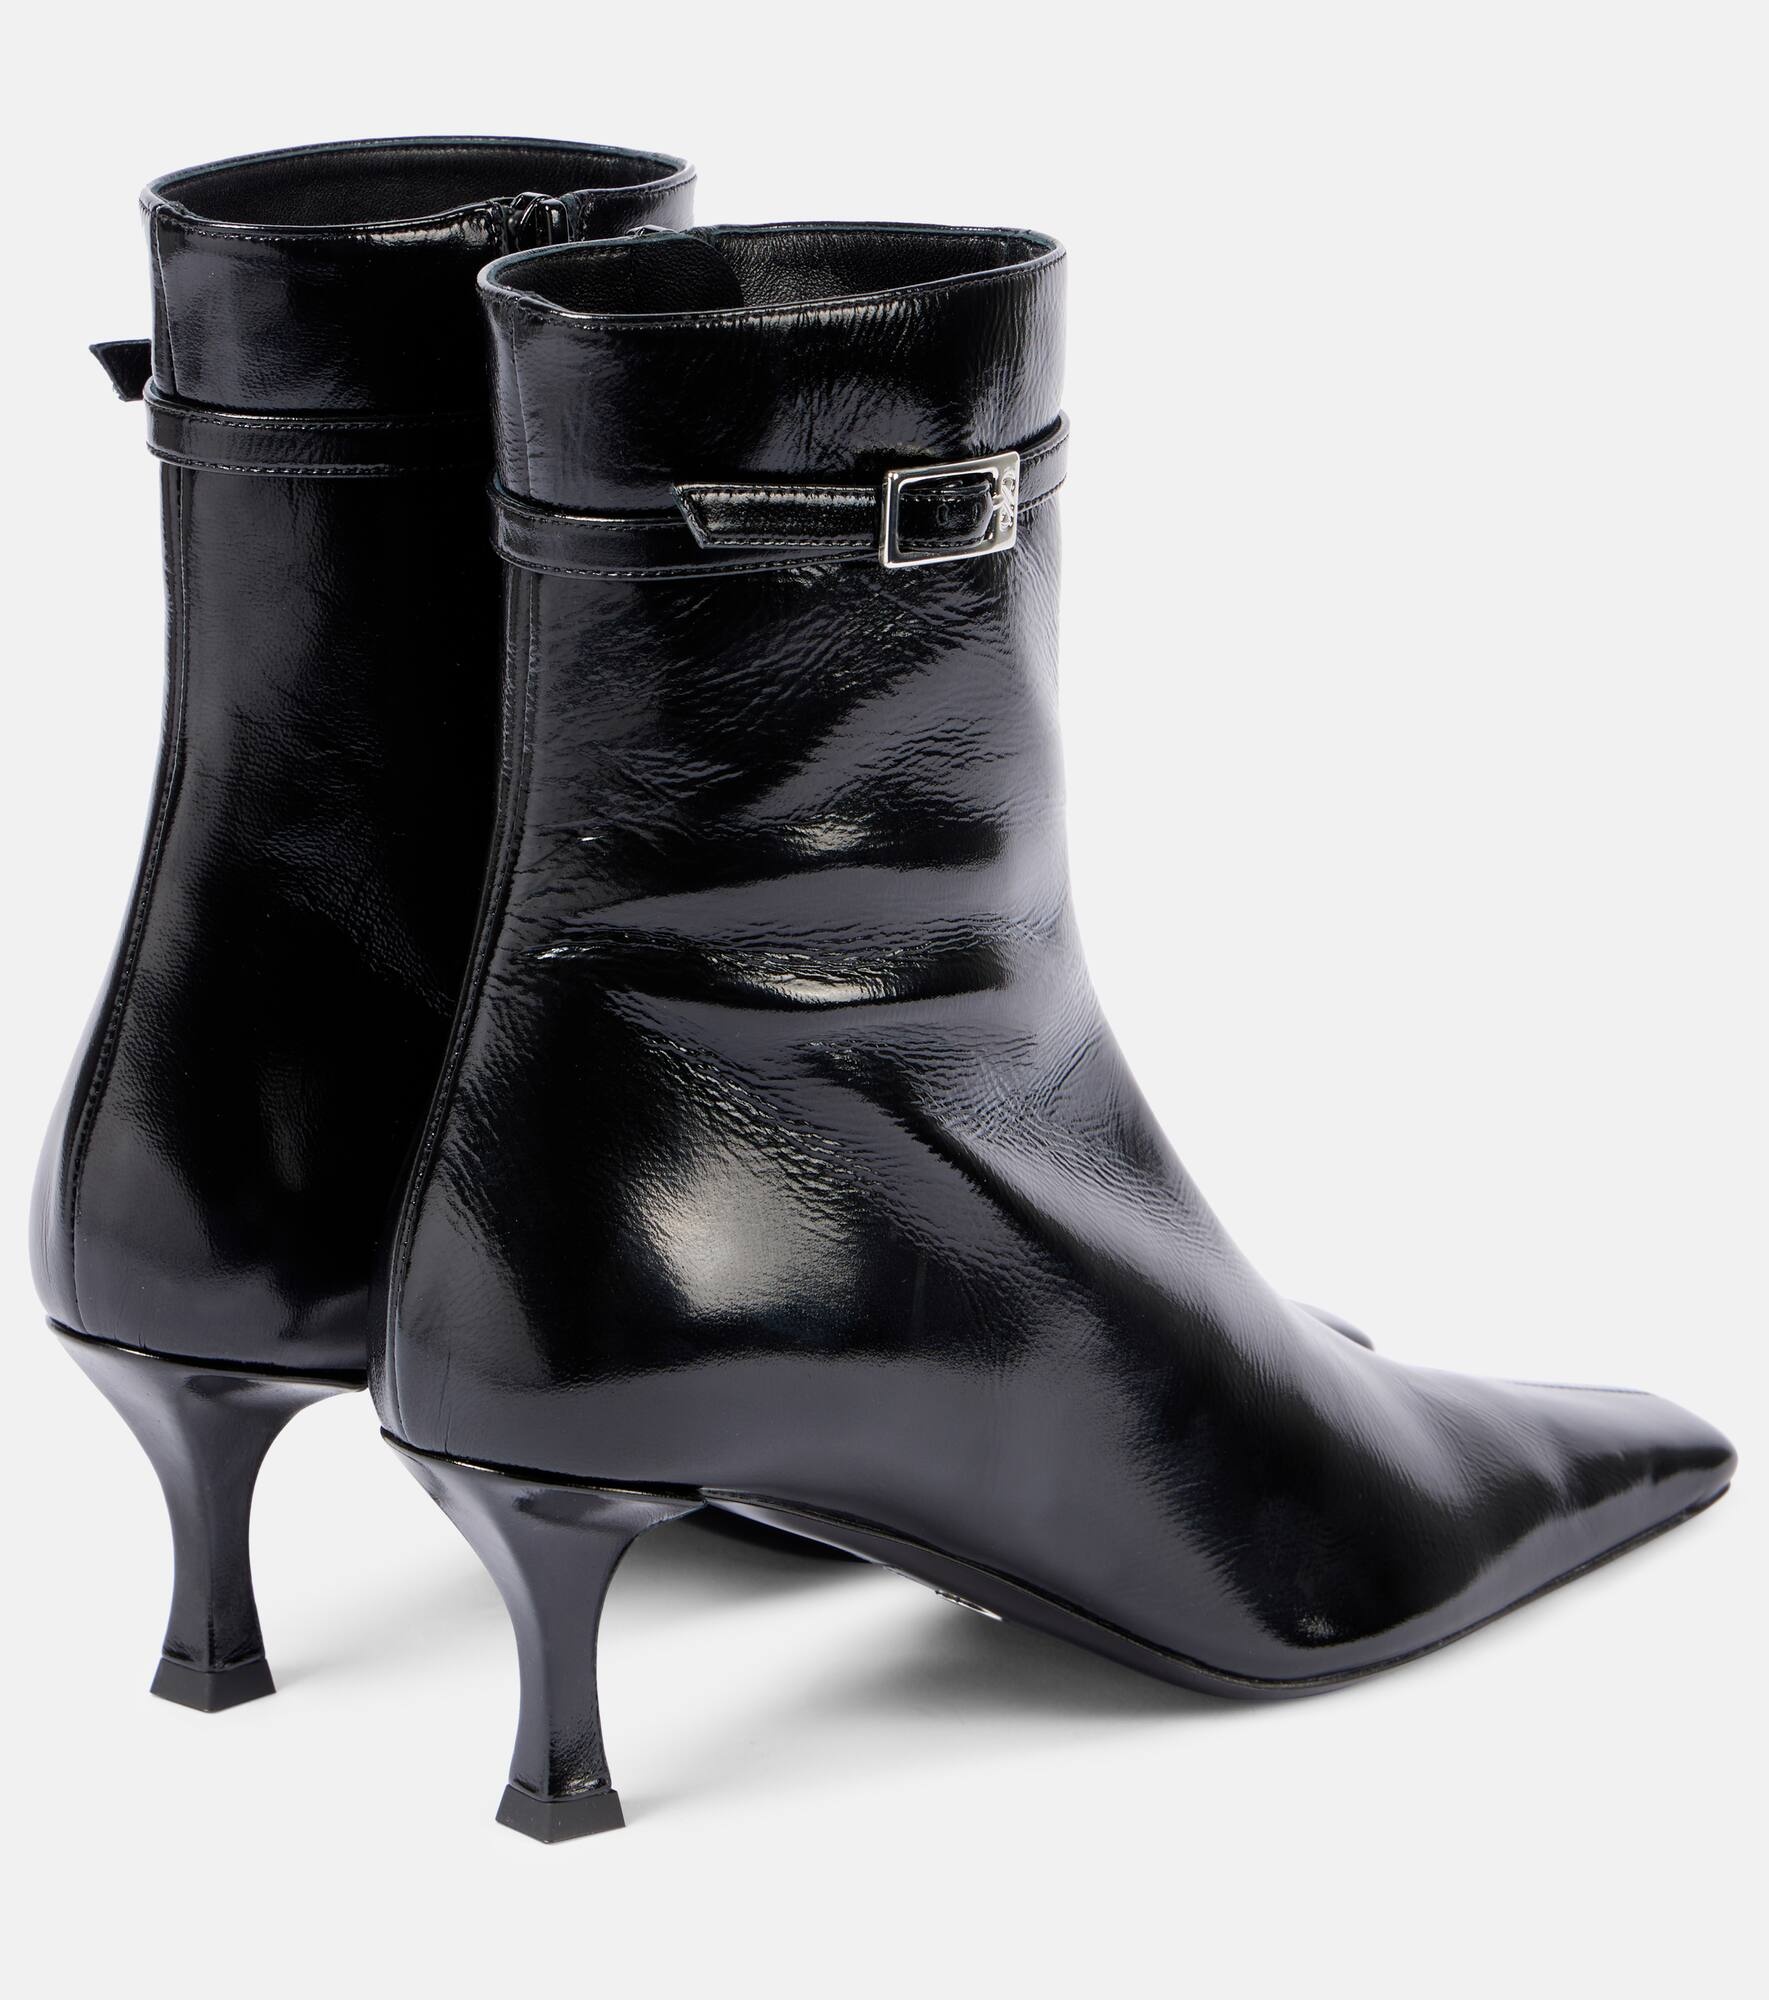 60 leather ankle boots - 3